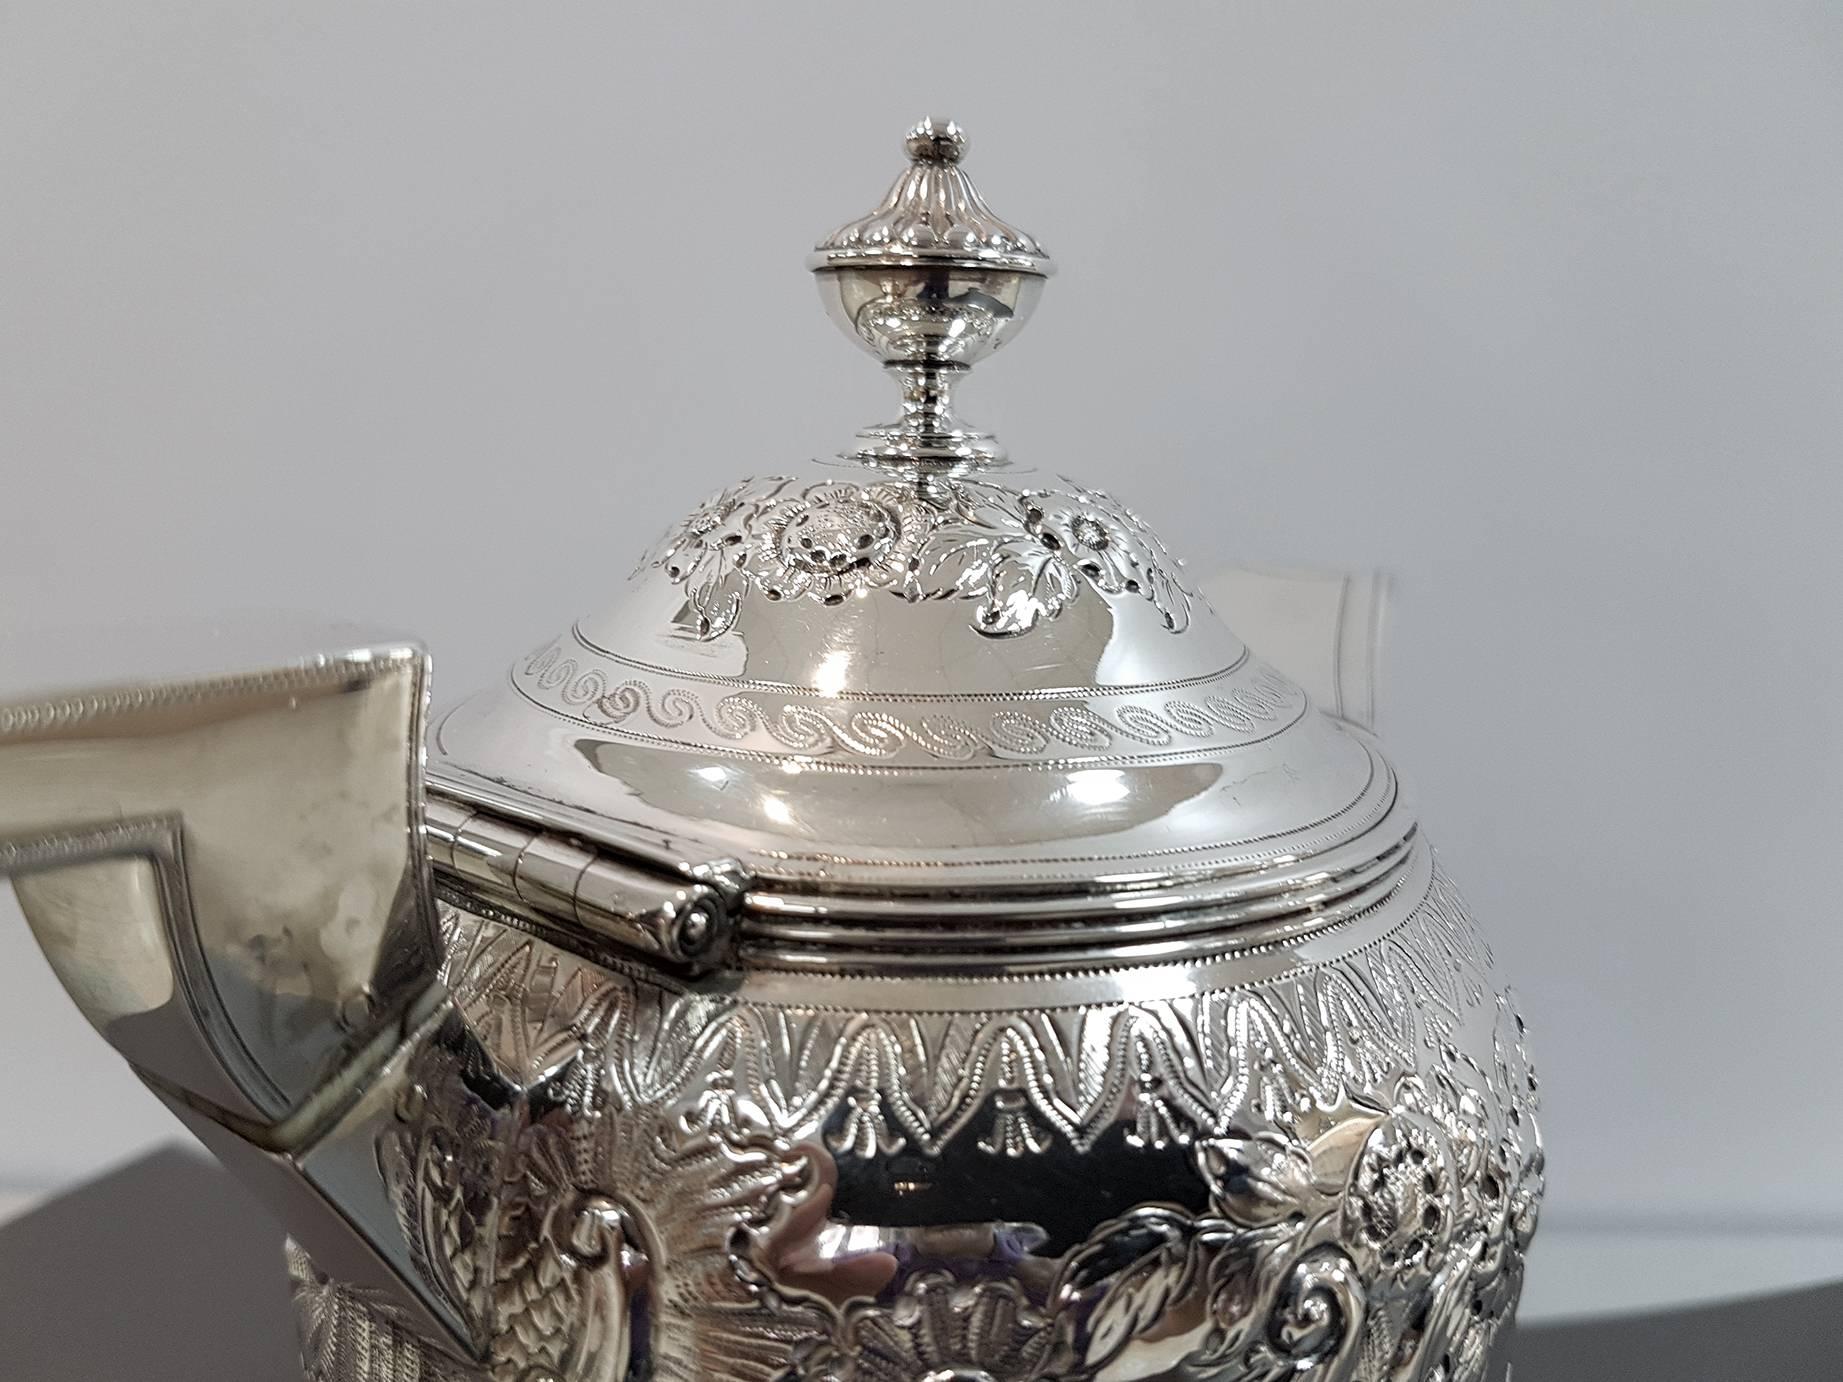 The sterling silver hot water jug has a cylindrical shape embossed and chiseled with scrolls, flowers and leaves.
The hinged lid is ceased with flowers.

Rebecca Emes & Edward Barnard
London, 1809.

790 grams.
 